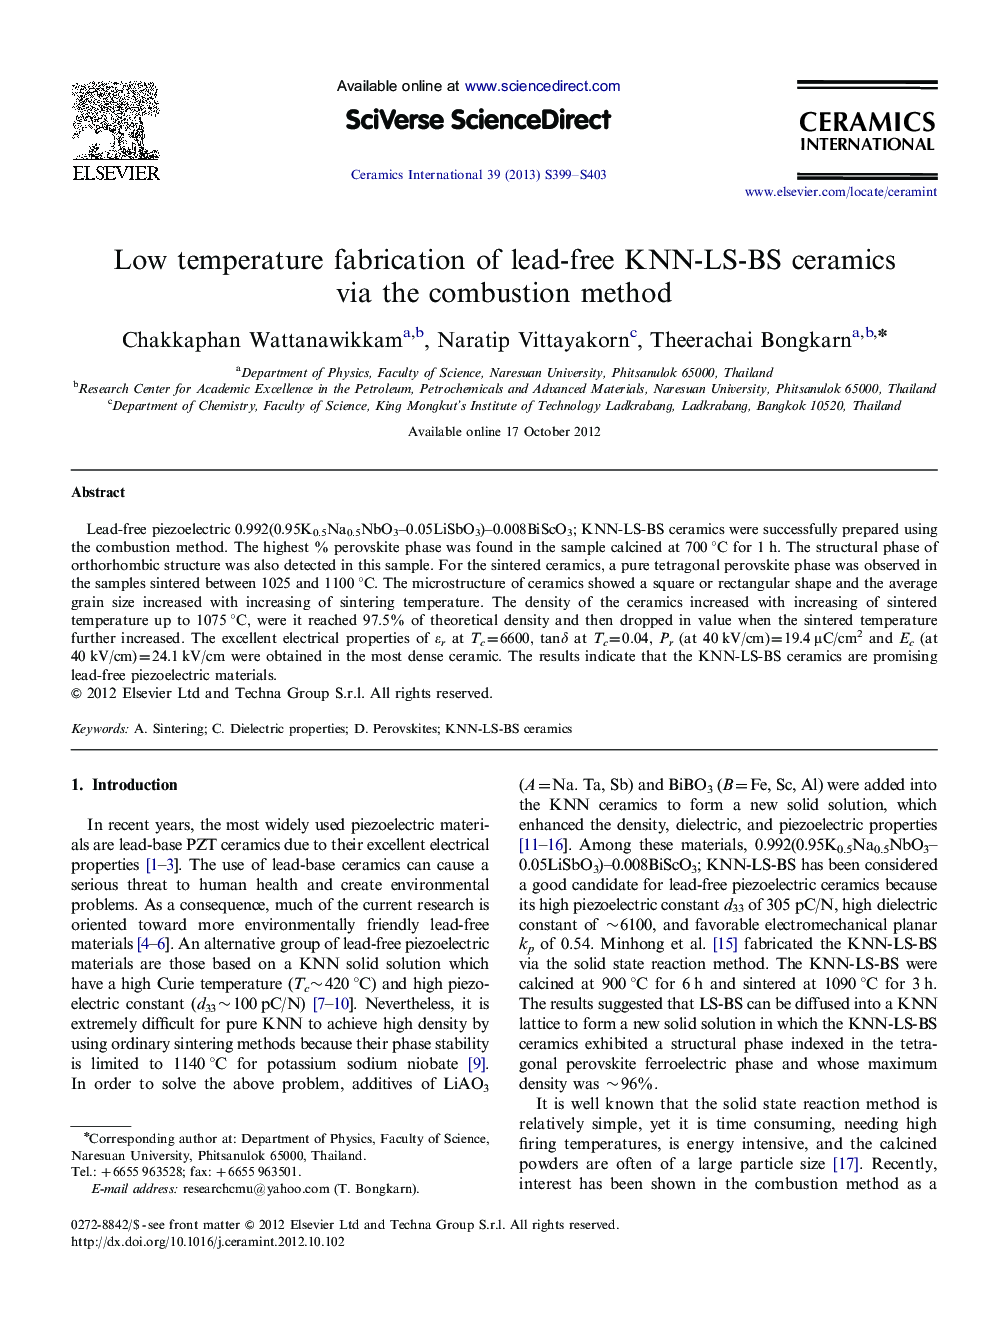 Low temperature fabrication of lead-free KNN-LS-BS ceramics via the combustion method